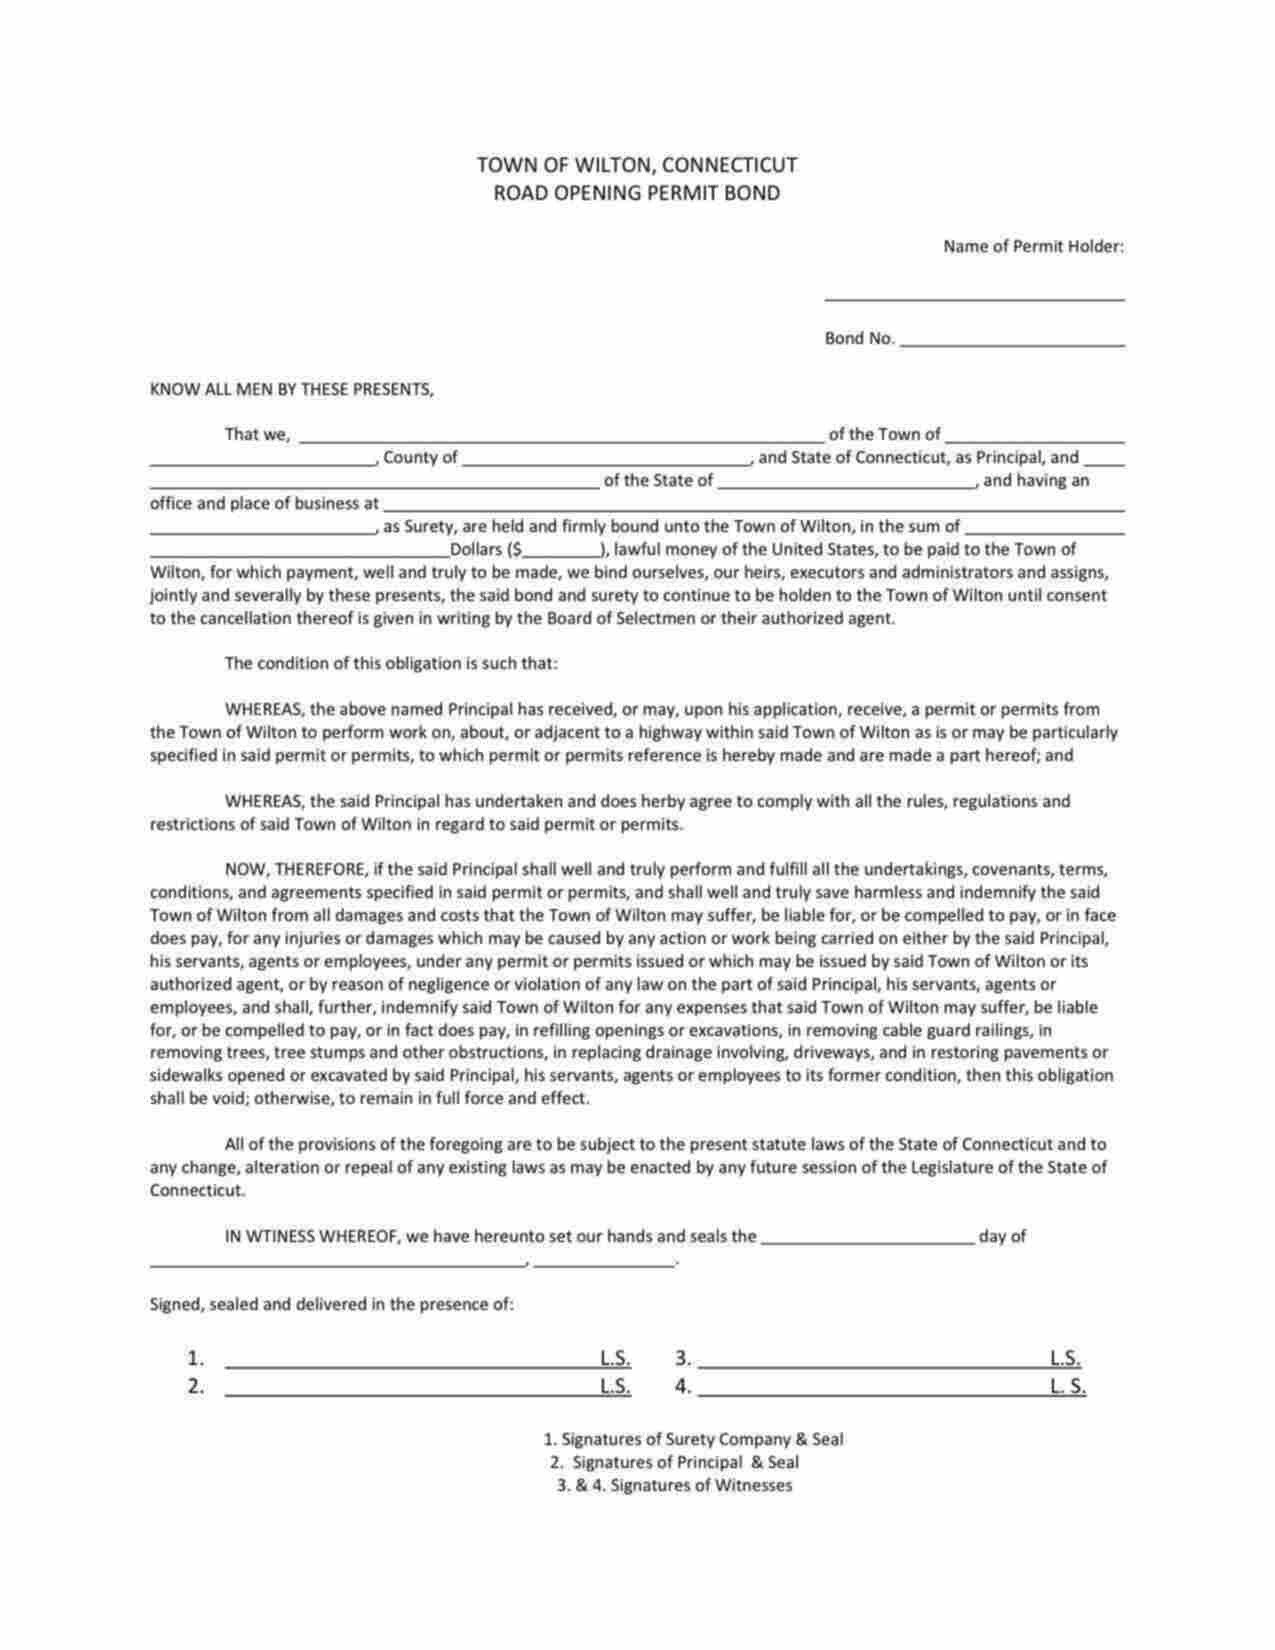 Connecticut Road Opening Permit Bond Form